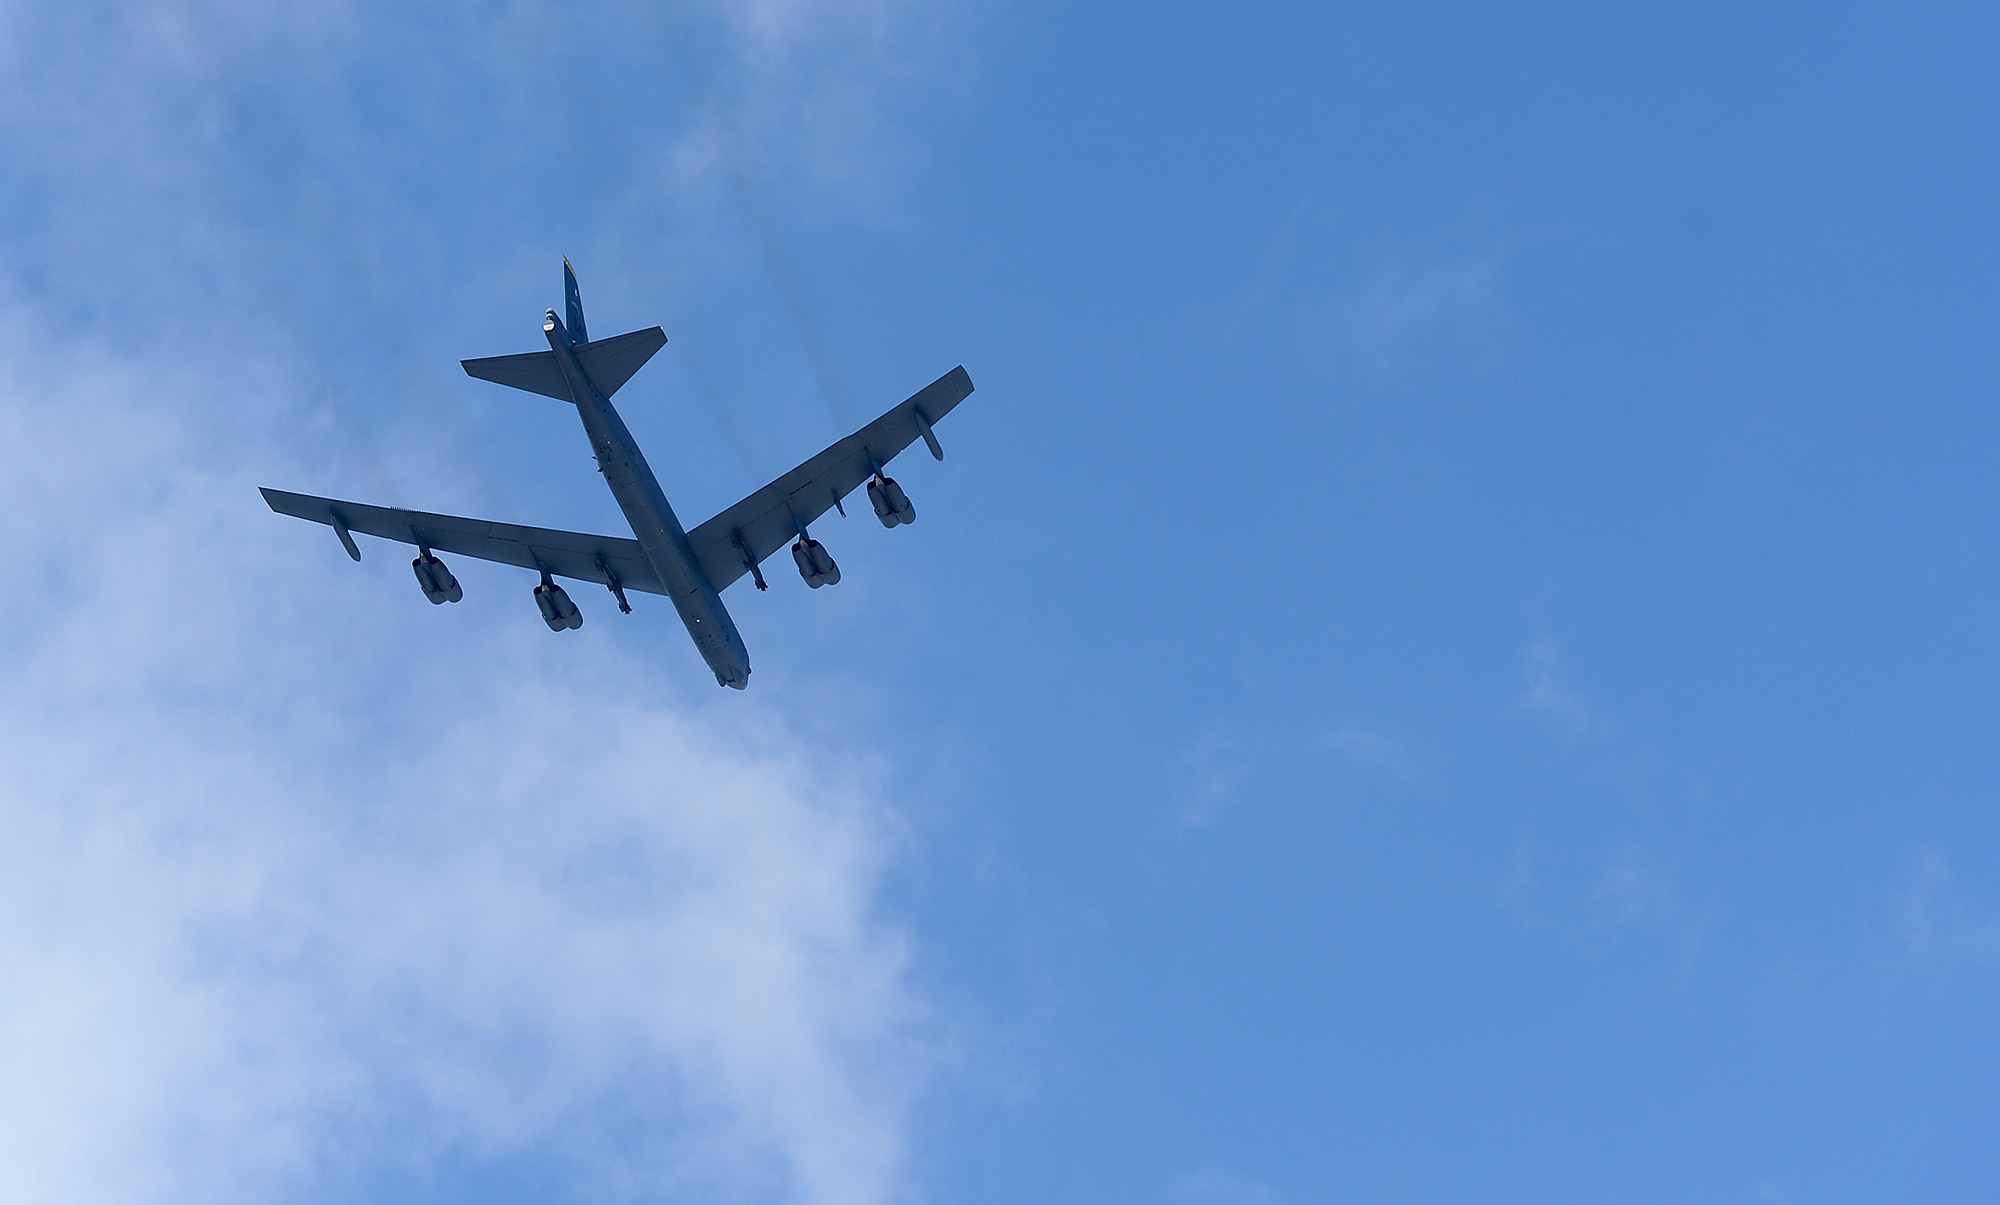 A B-52 Stratofortress flies over the Air Force Memorial during a wreath laying ceremony March 2, 2015, hosted by Air Force Chief of Staff Gen. Mark A. Welsh III, honoring Air Force Vietnam prisoners of war and missing in action in Arlington, Va. The B-52 is from the 69th Bomb Squadron at Minot Air Force Base, N.D. (U.S. Air Force photo/Scott M. Ash)